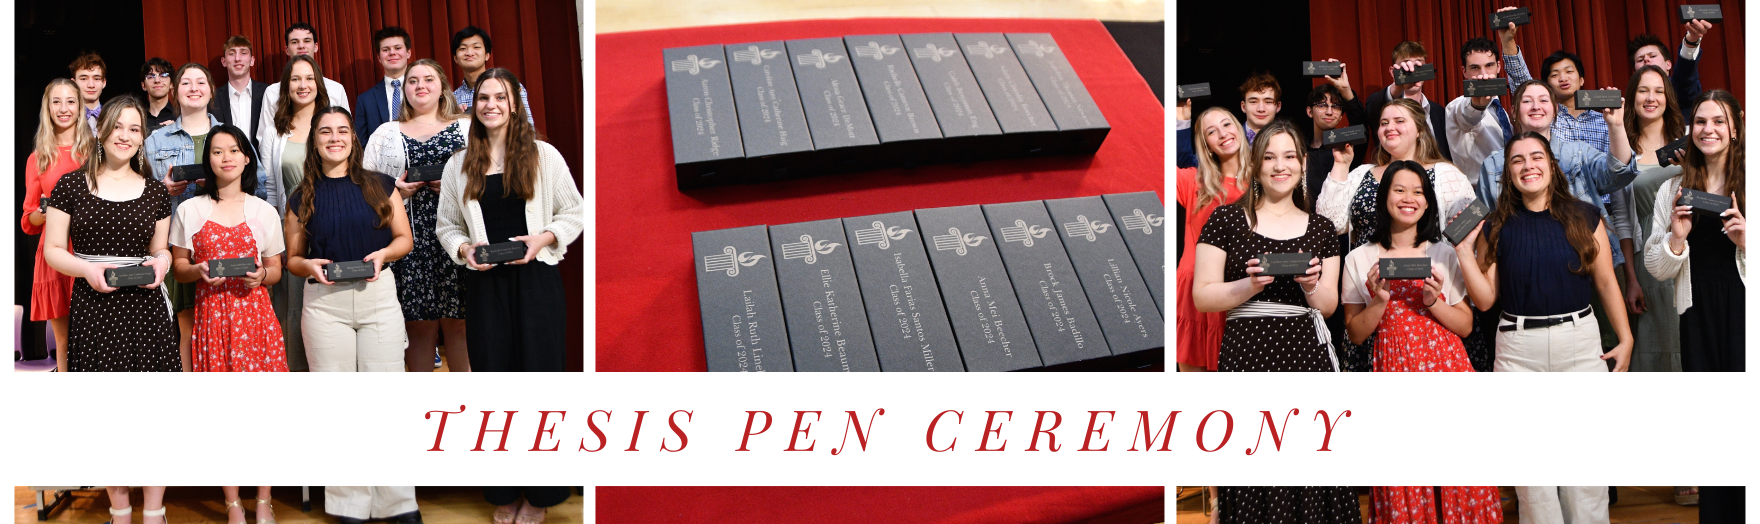 Thesis Pen Ceremony Photo Collage  |  FCS Teacher Story Header